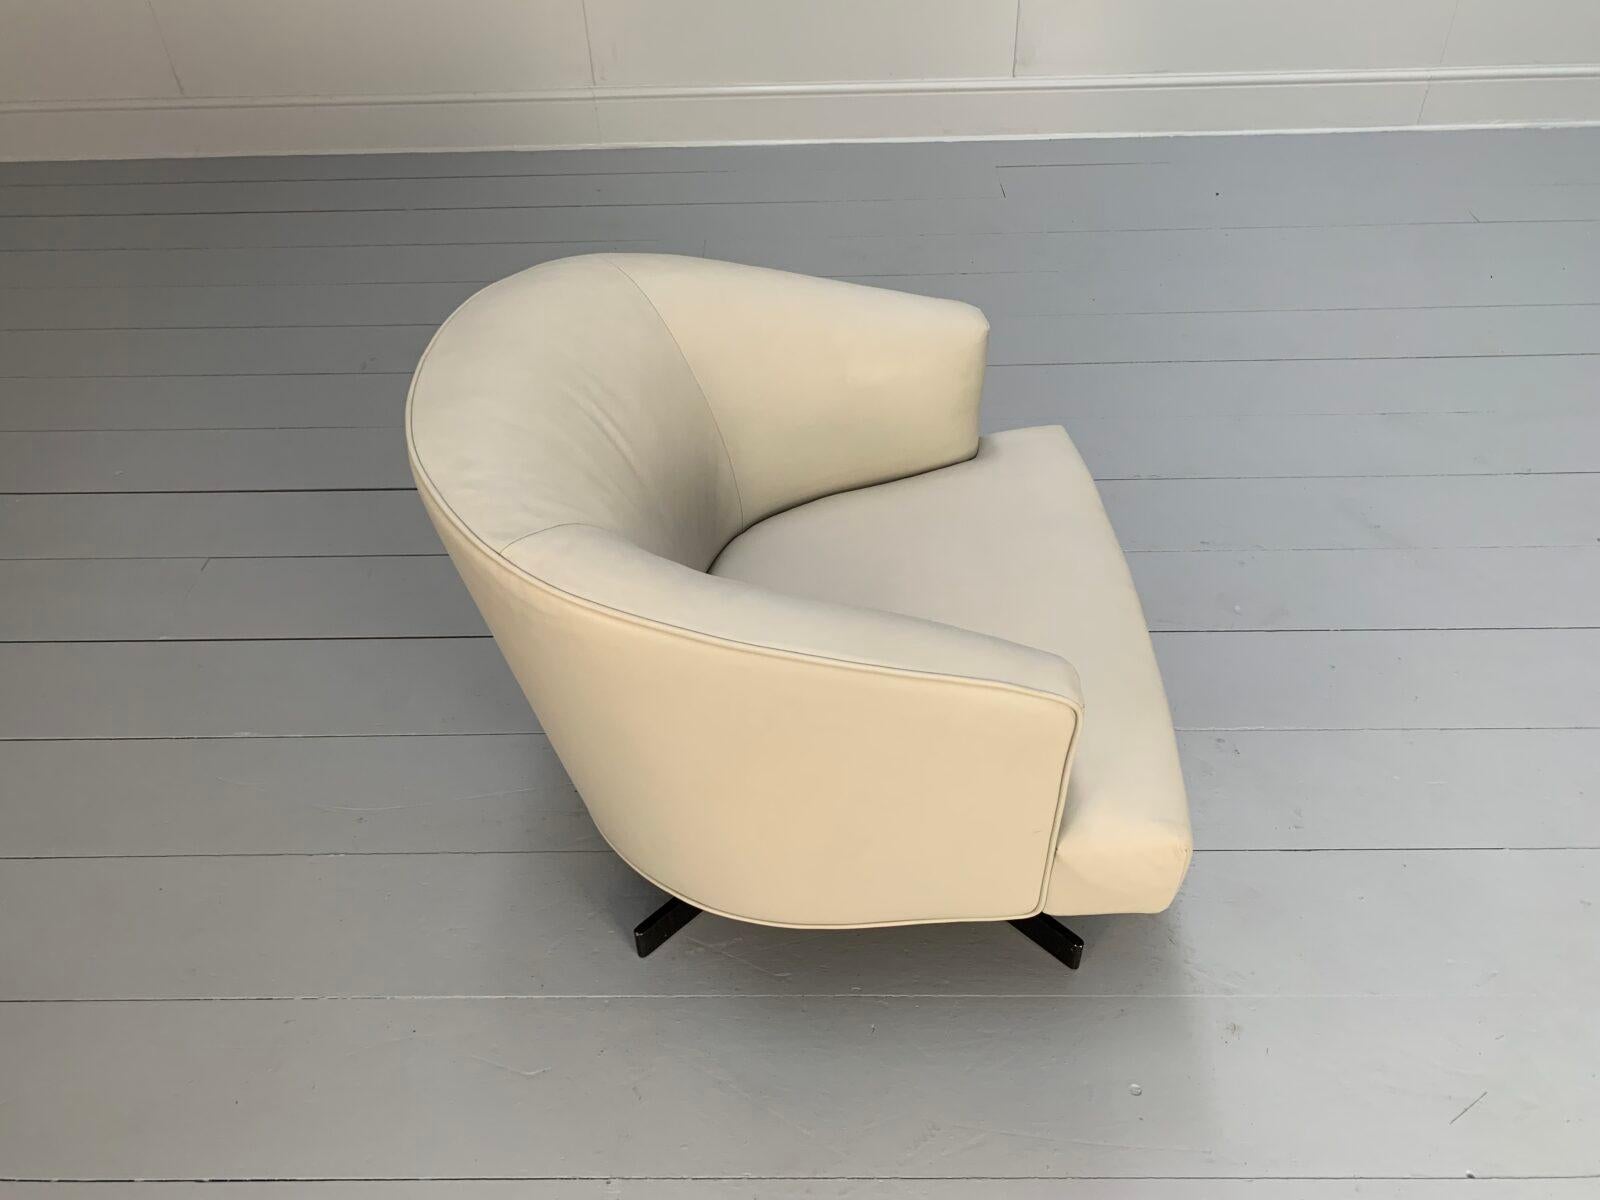 Minotti “Martin” Armchair – In Ivory “Pelle” Leather For Sale 2